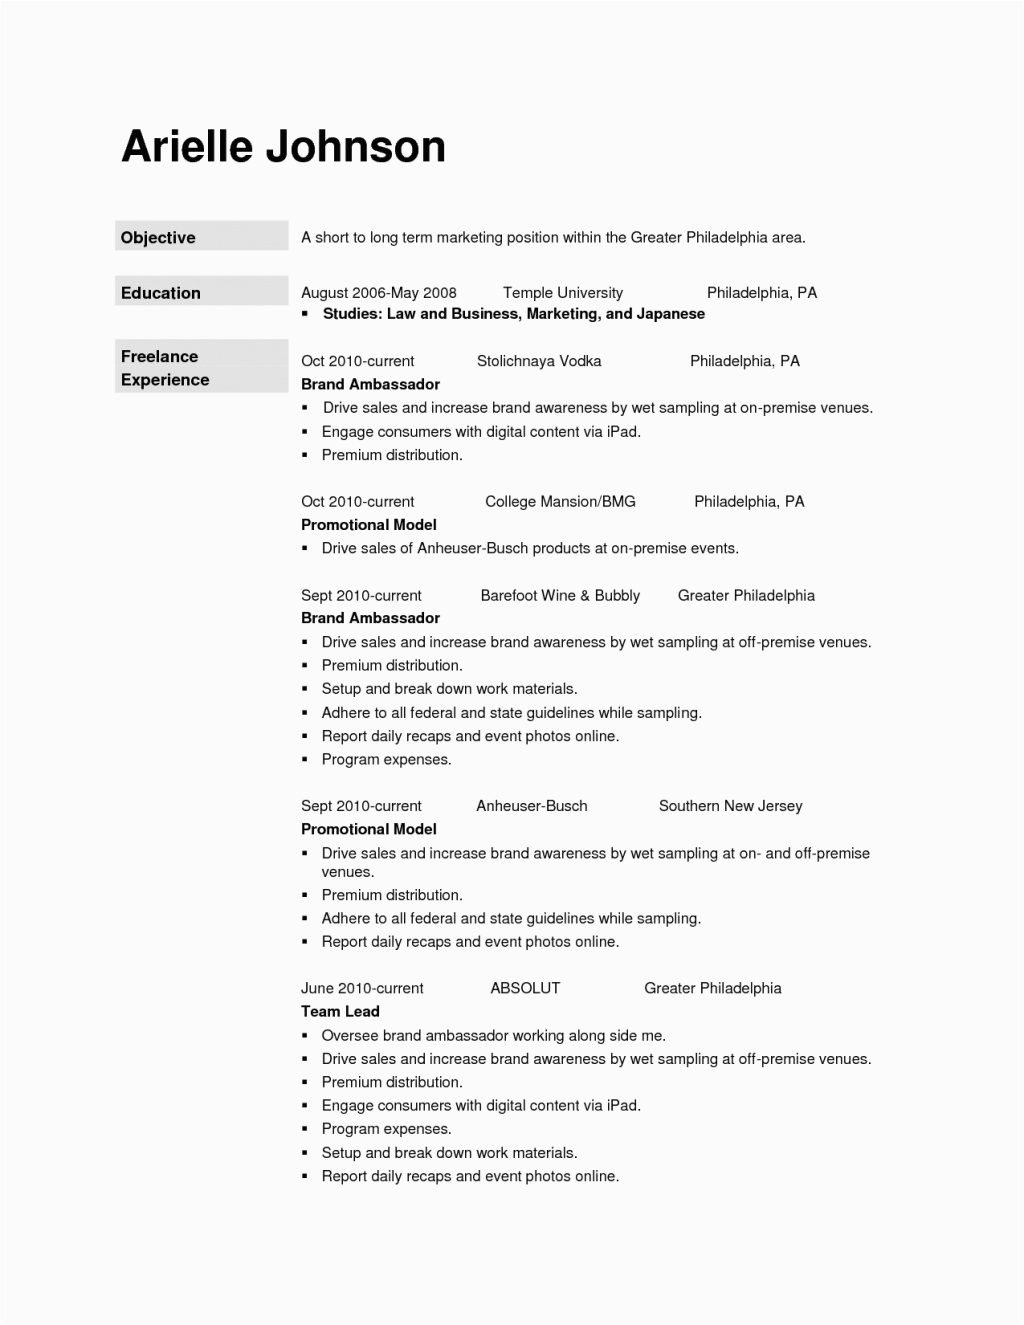 Sample Resume for Promotion within Same Company How to Write Promotions Resume